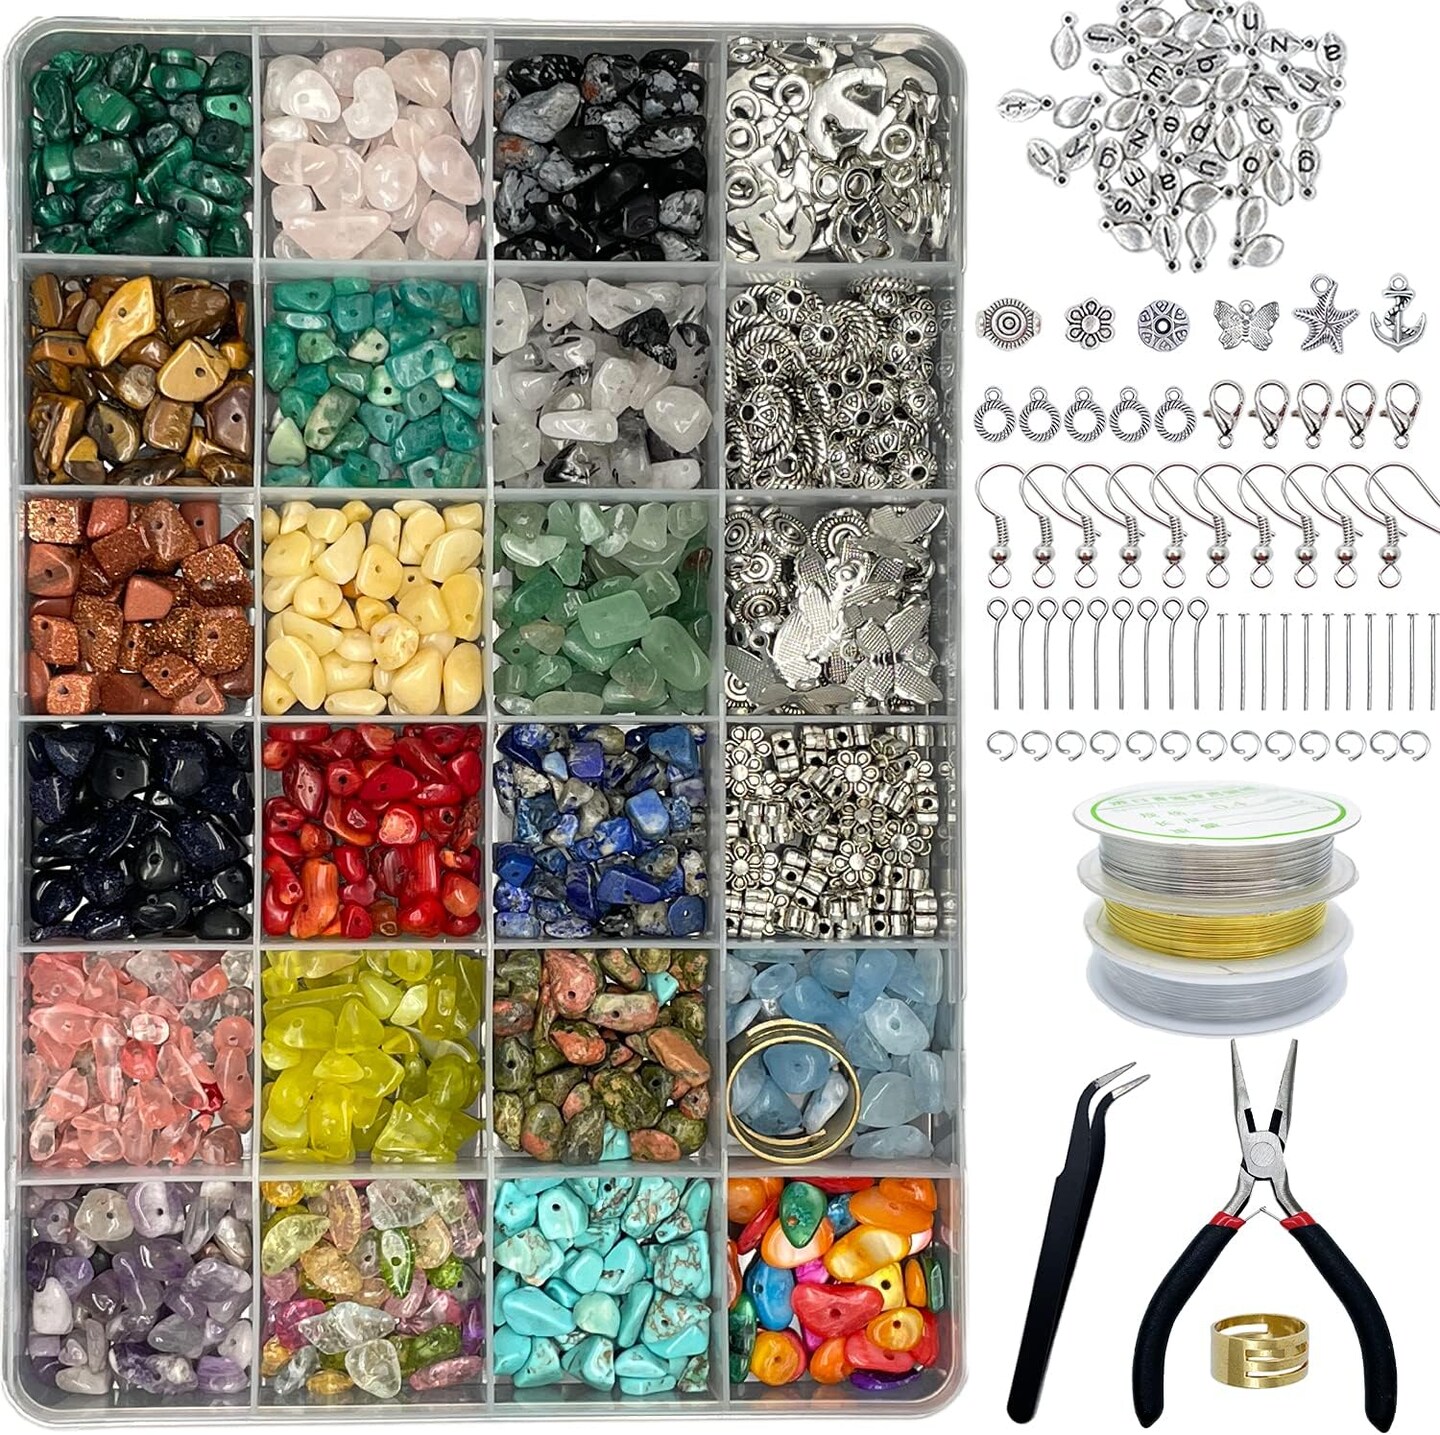 Jewelry Making Supplies Kit - 1587 PCS Beads, Crystal Beads, Jewelry Pliers, Beading Wire, Earring Hooks, Rings, Bracelets for Girls and Adults